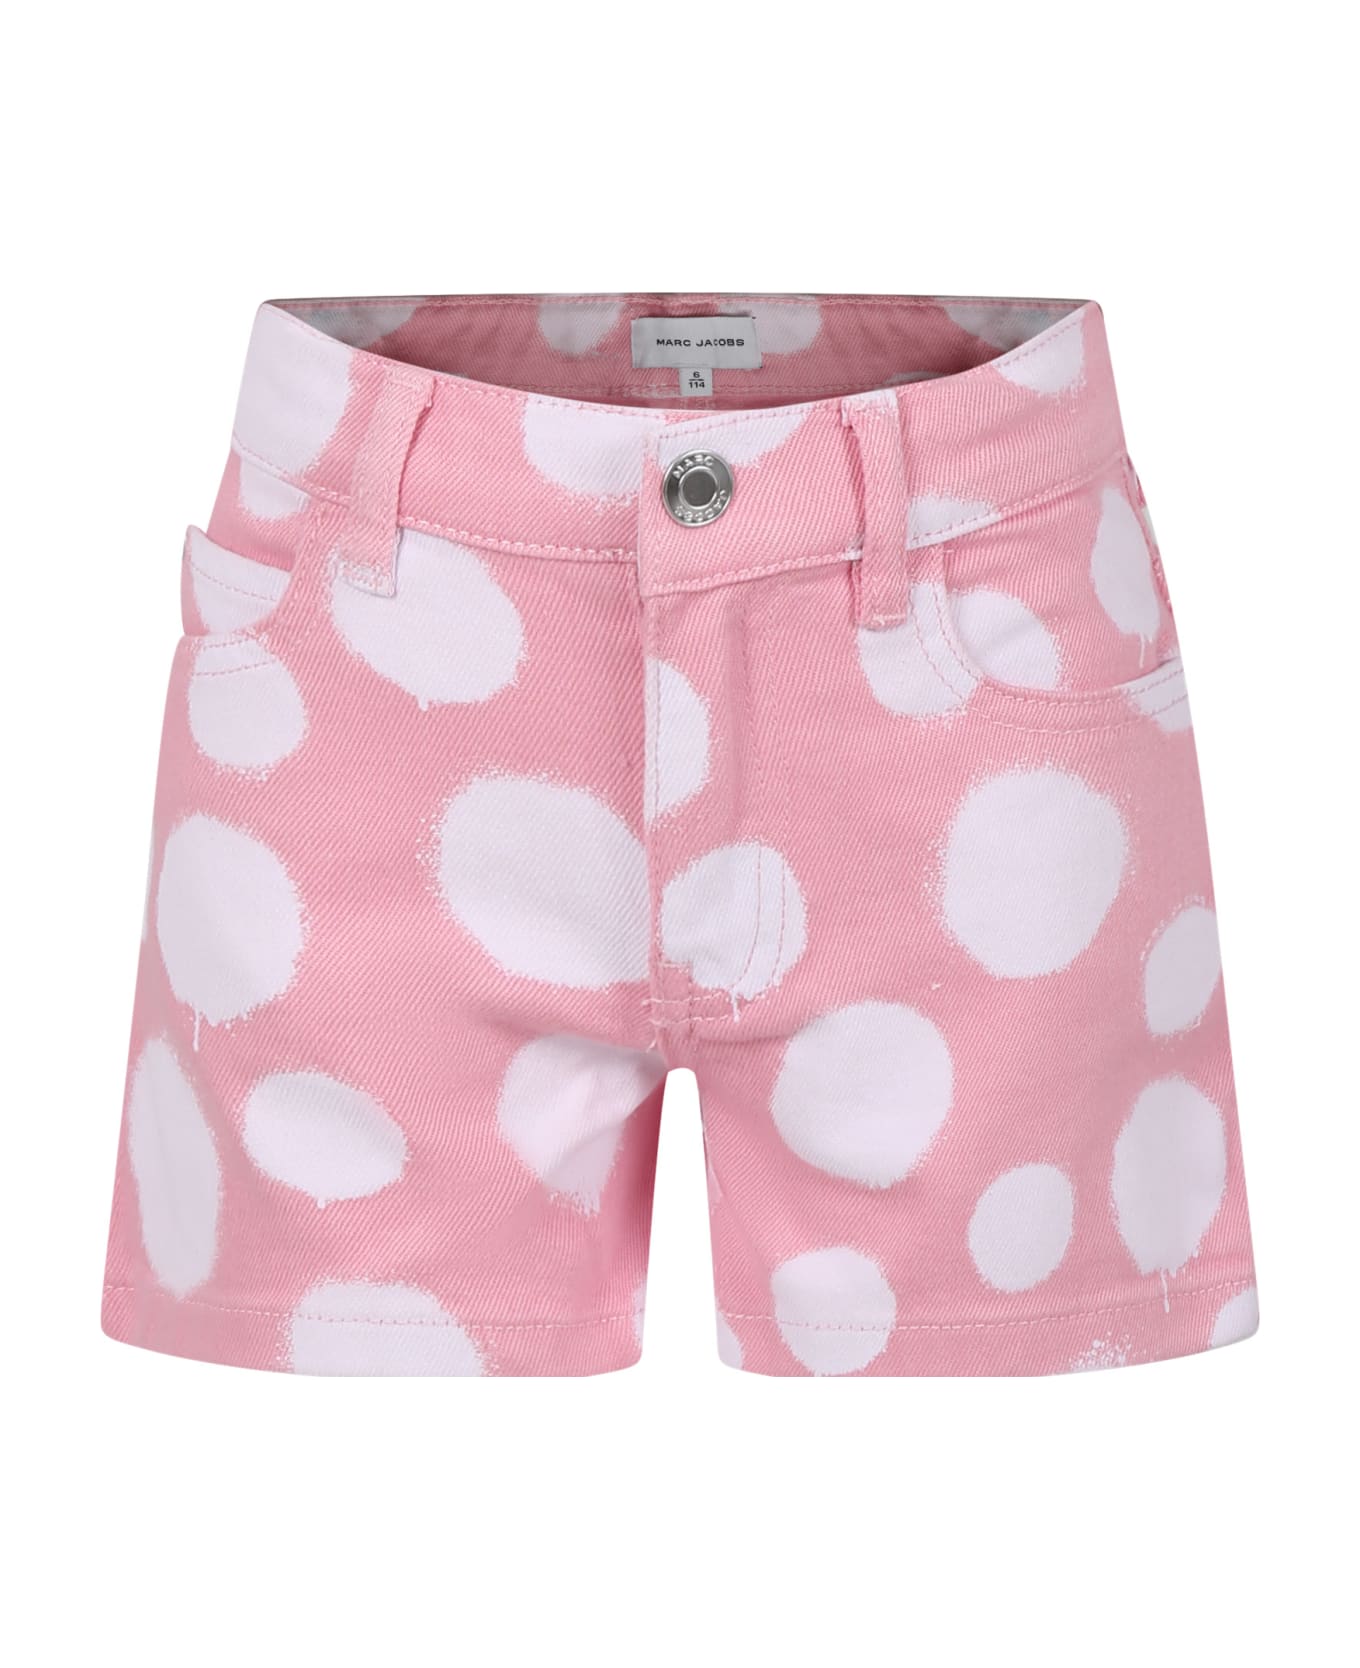 Marc Jacobs Pink Shorts For Girl With All-over Polka Dots - Pink